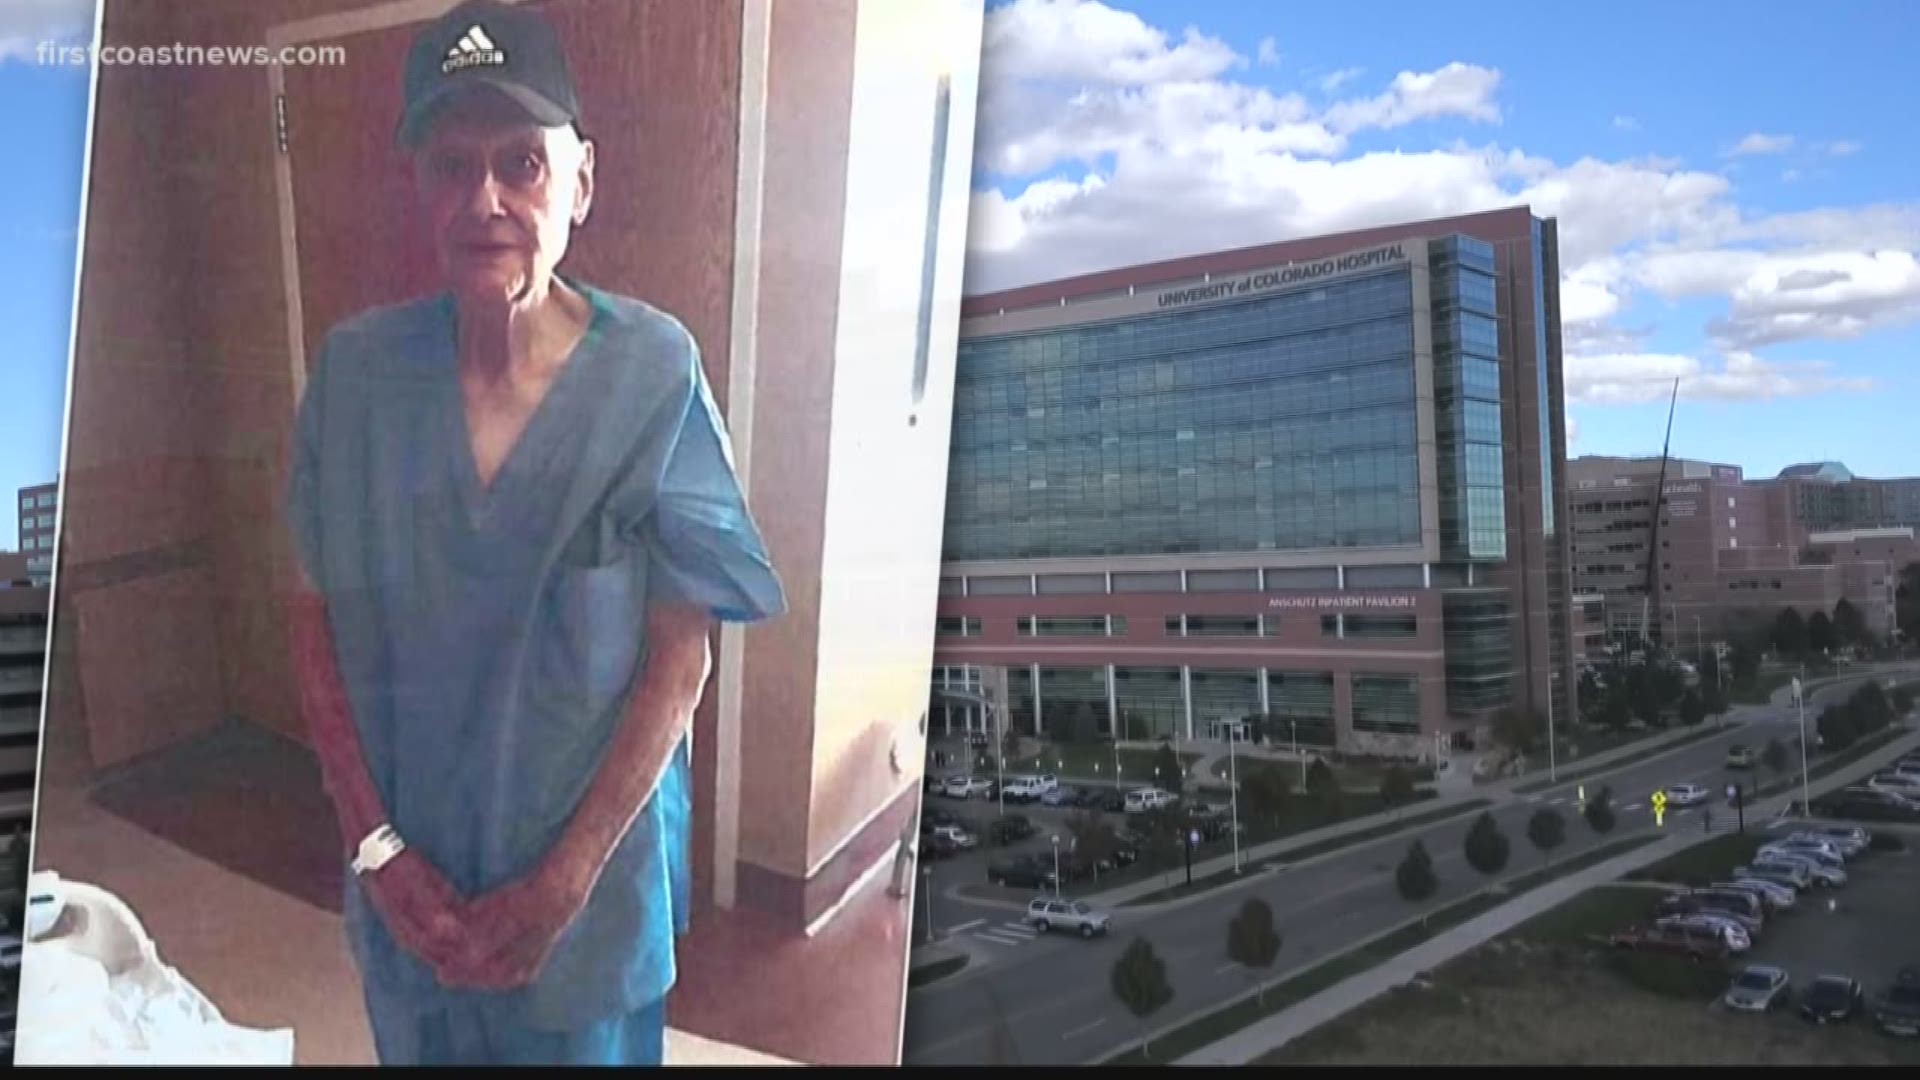 Within the bustle and organized chaos of Denver's massive airport, an 80-year-old man with Alzheimer's disease named Jerry Ellingsen was found wandering alone after traveling with his small dog from Fort Myers, Florida.